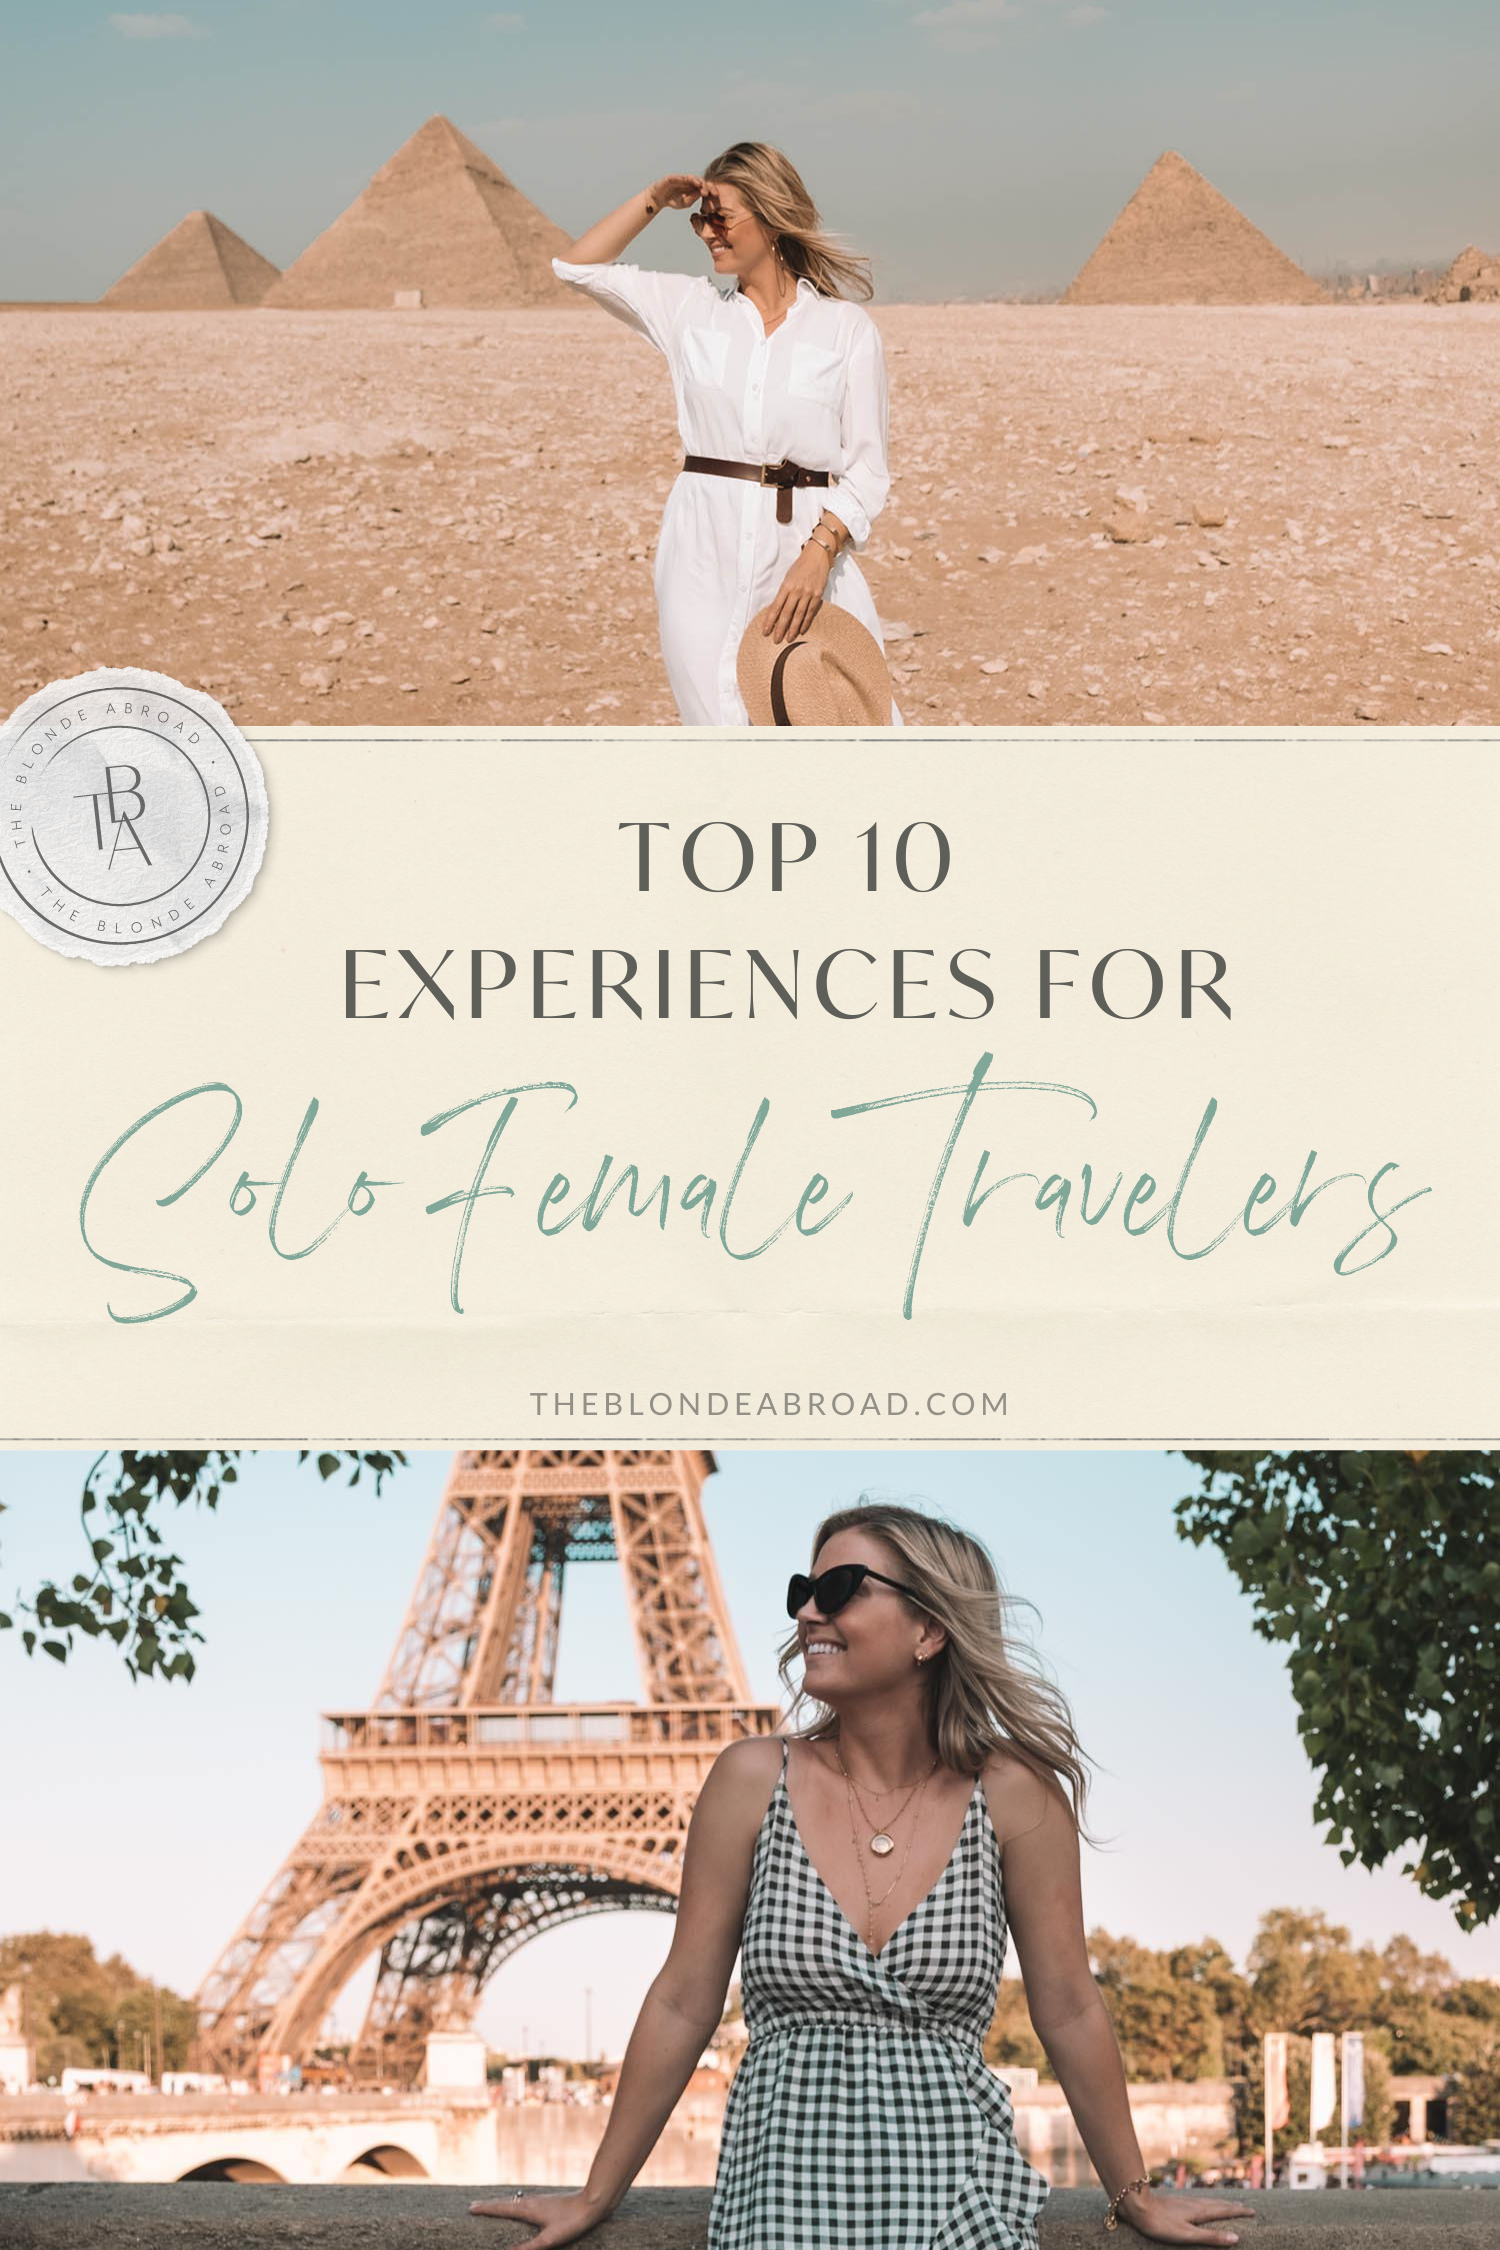 Top 10 Experiences for Solo Female Travelers